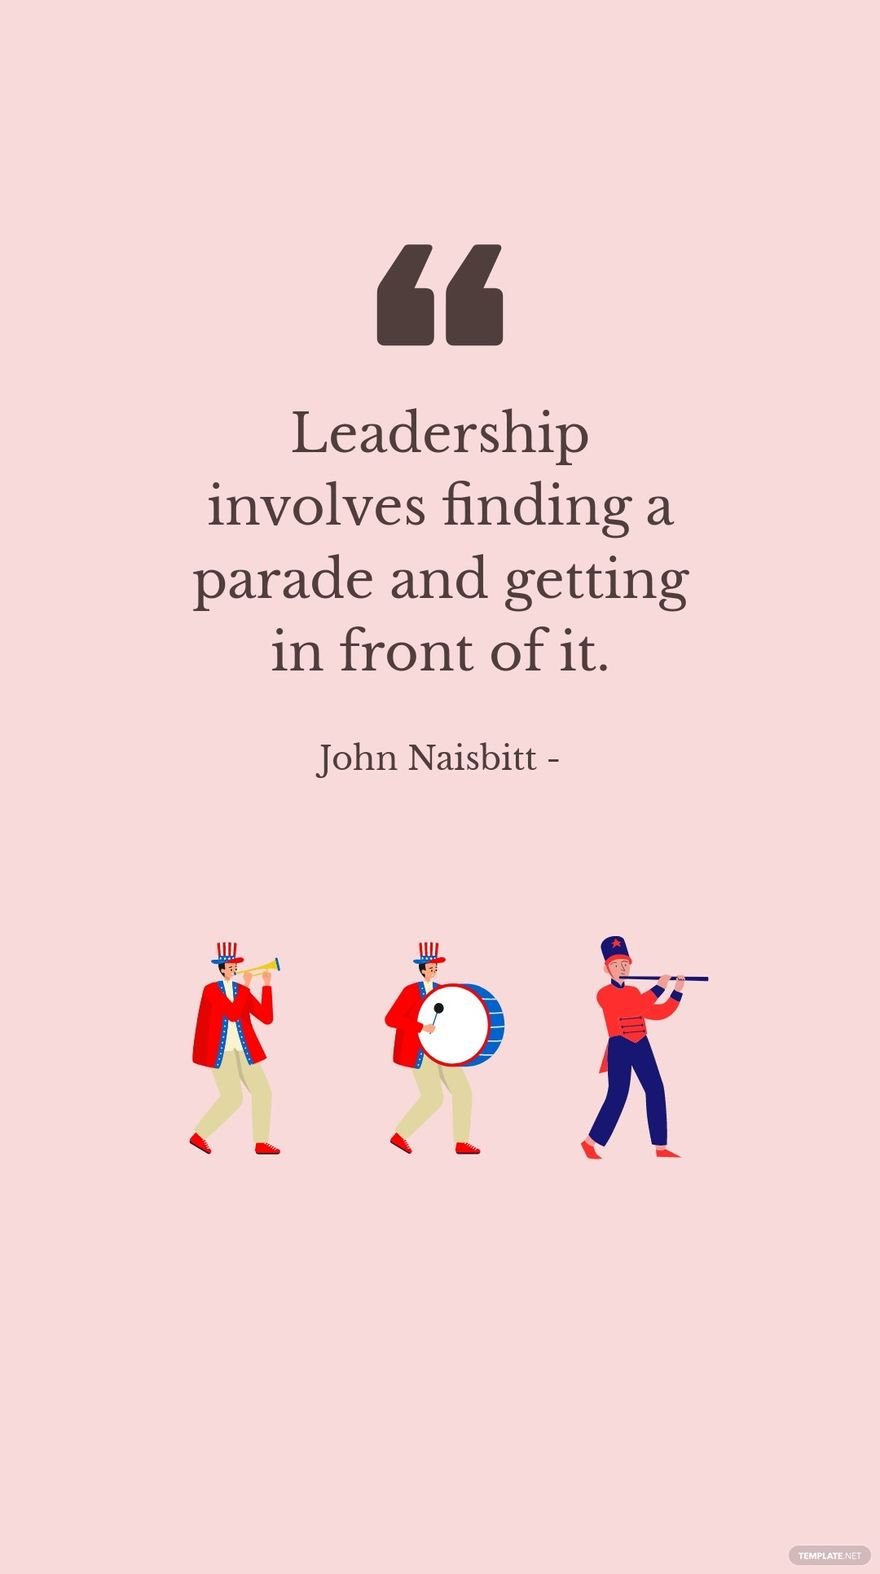 Free John Naisbitt - Leadership involves finding a parade and getting in front of it.